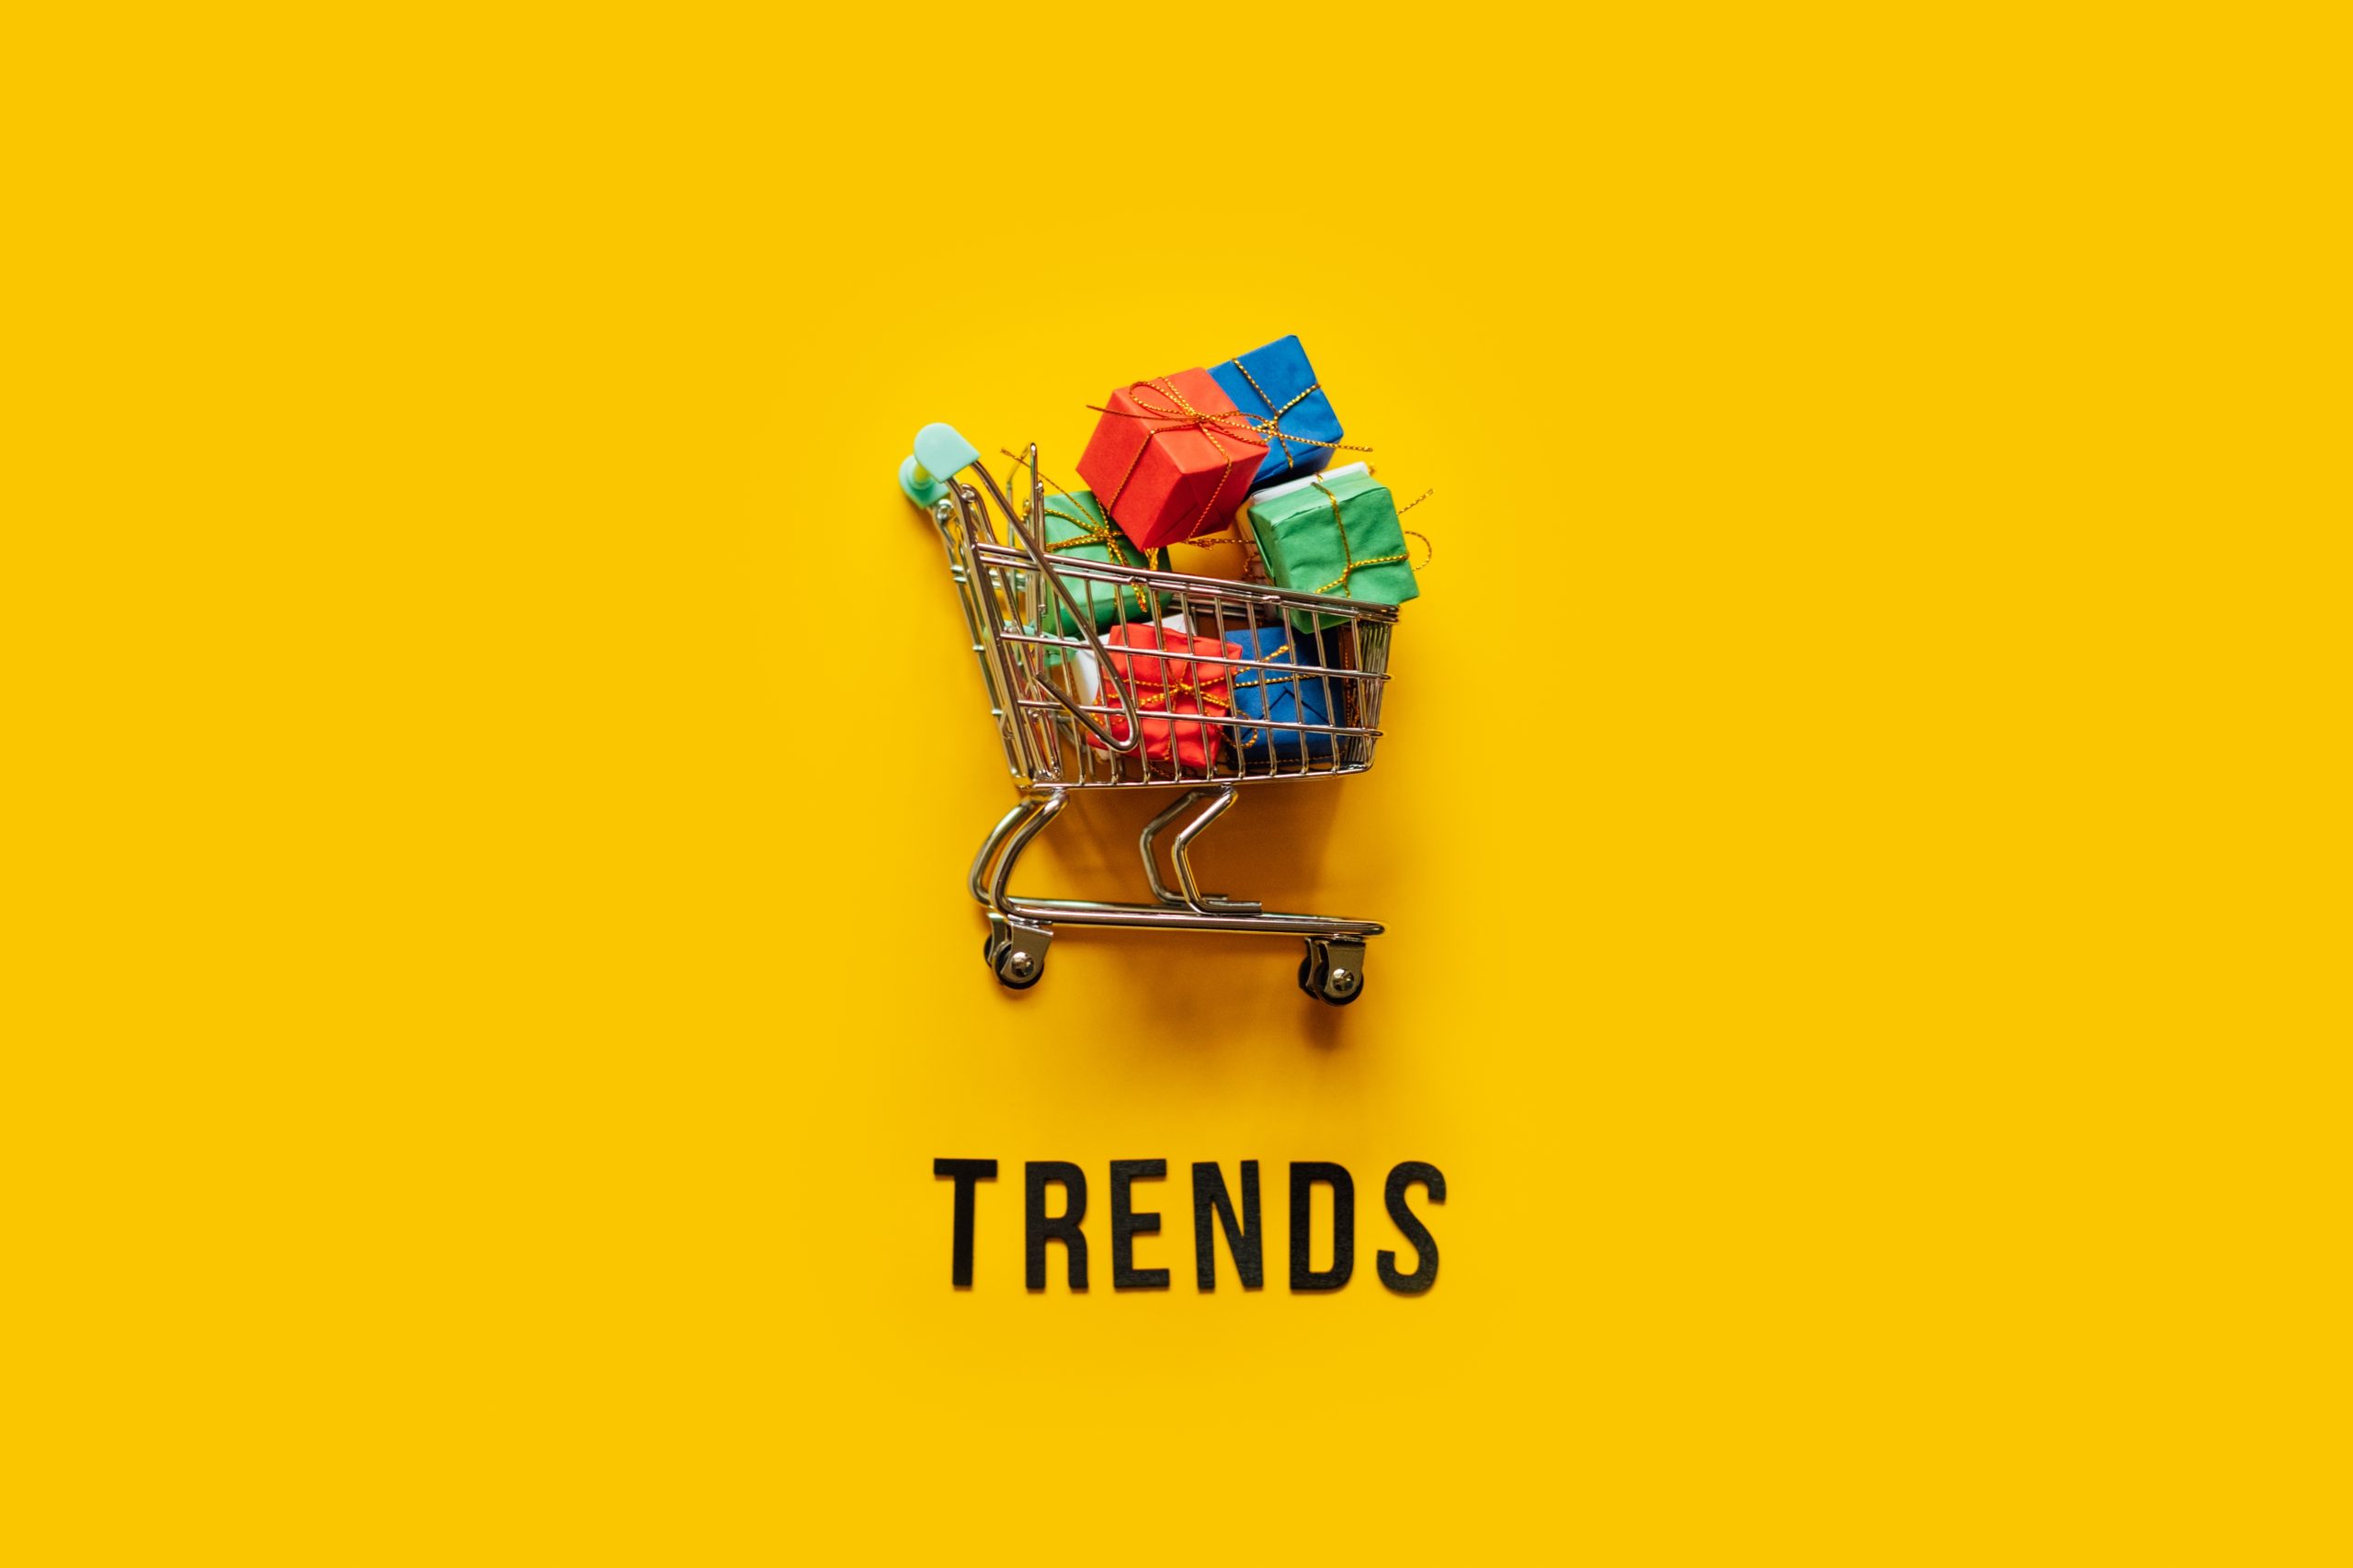 Shopping cart overfilled with boxes on a yellow background